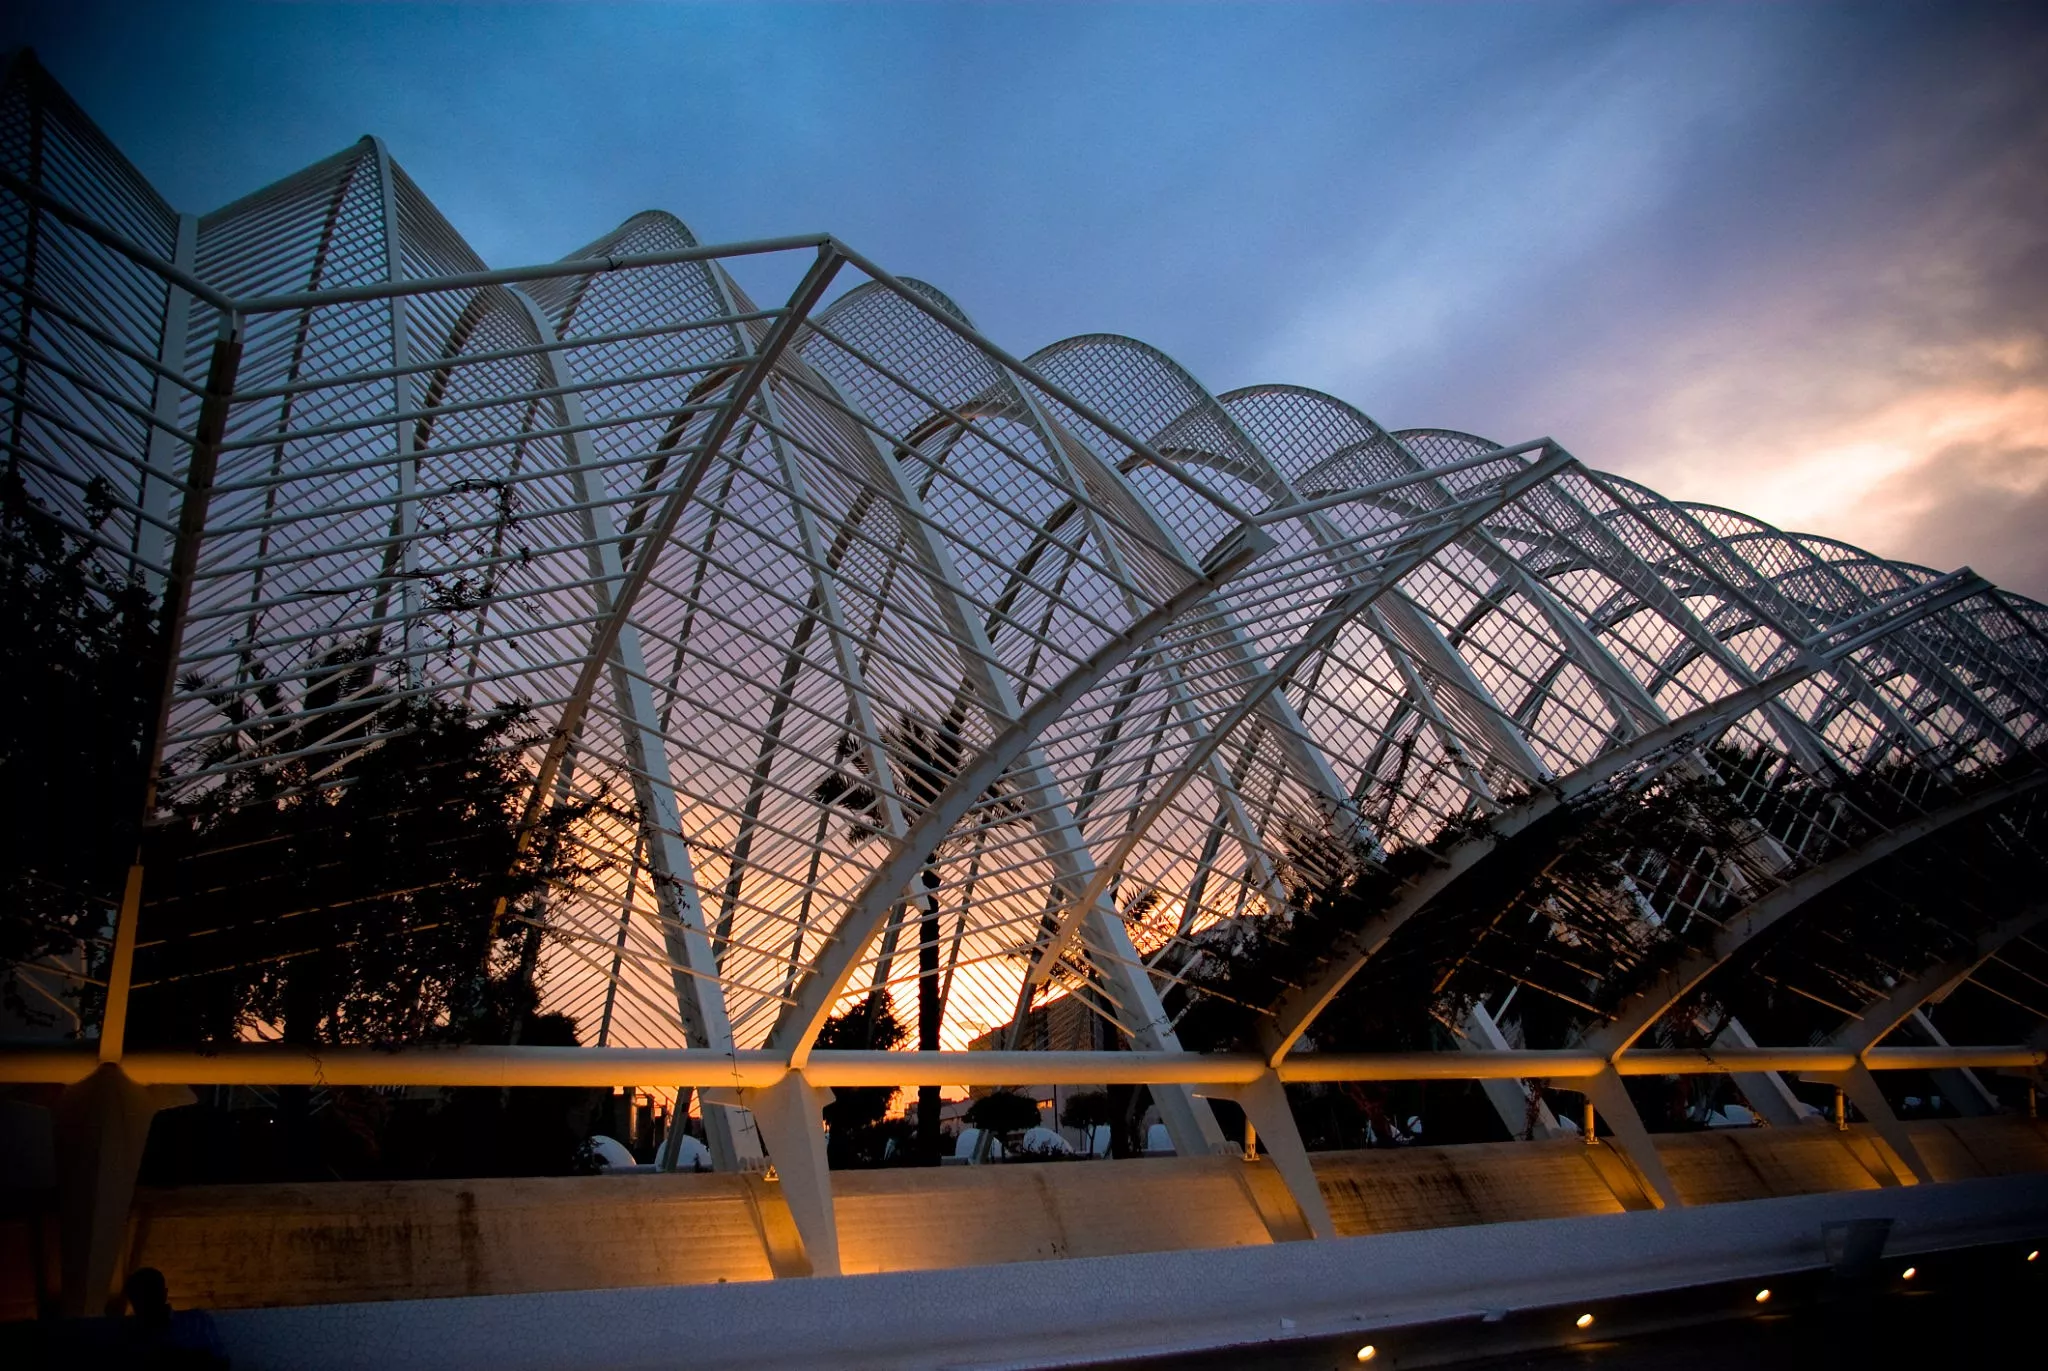 Terraza L'Umbracle in Spain, Europe | Nightclubs - Rated 4